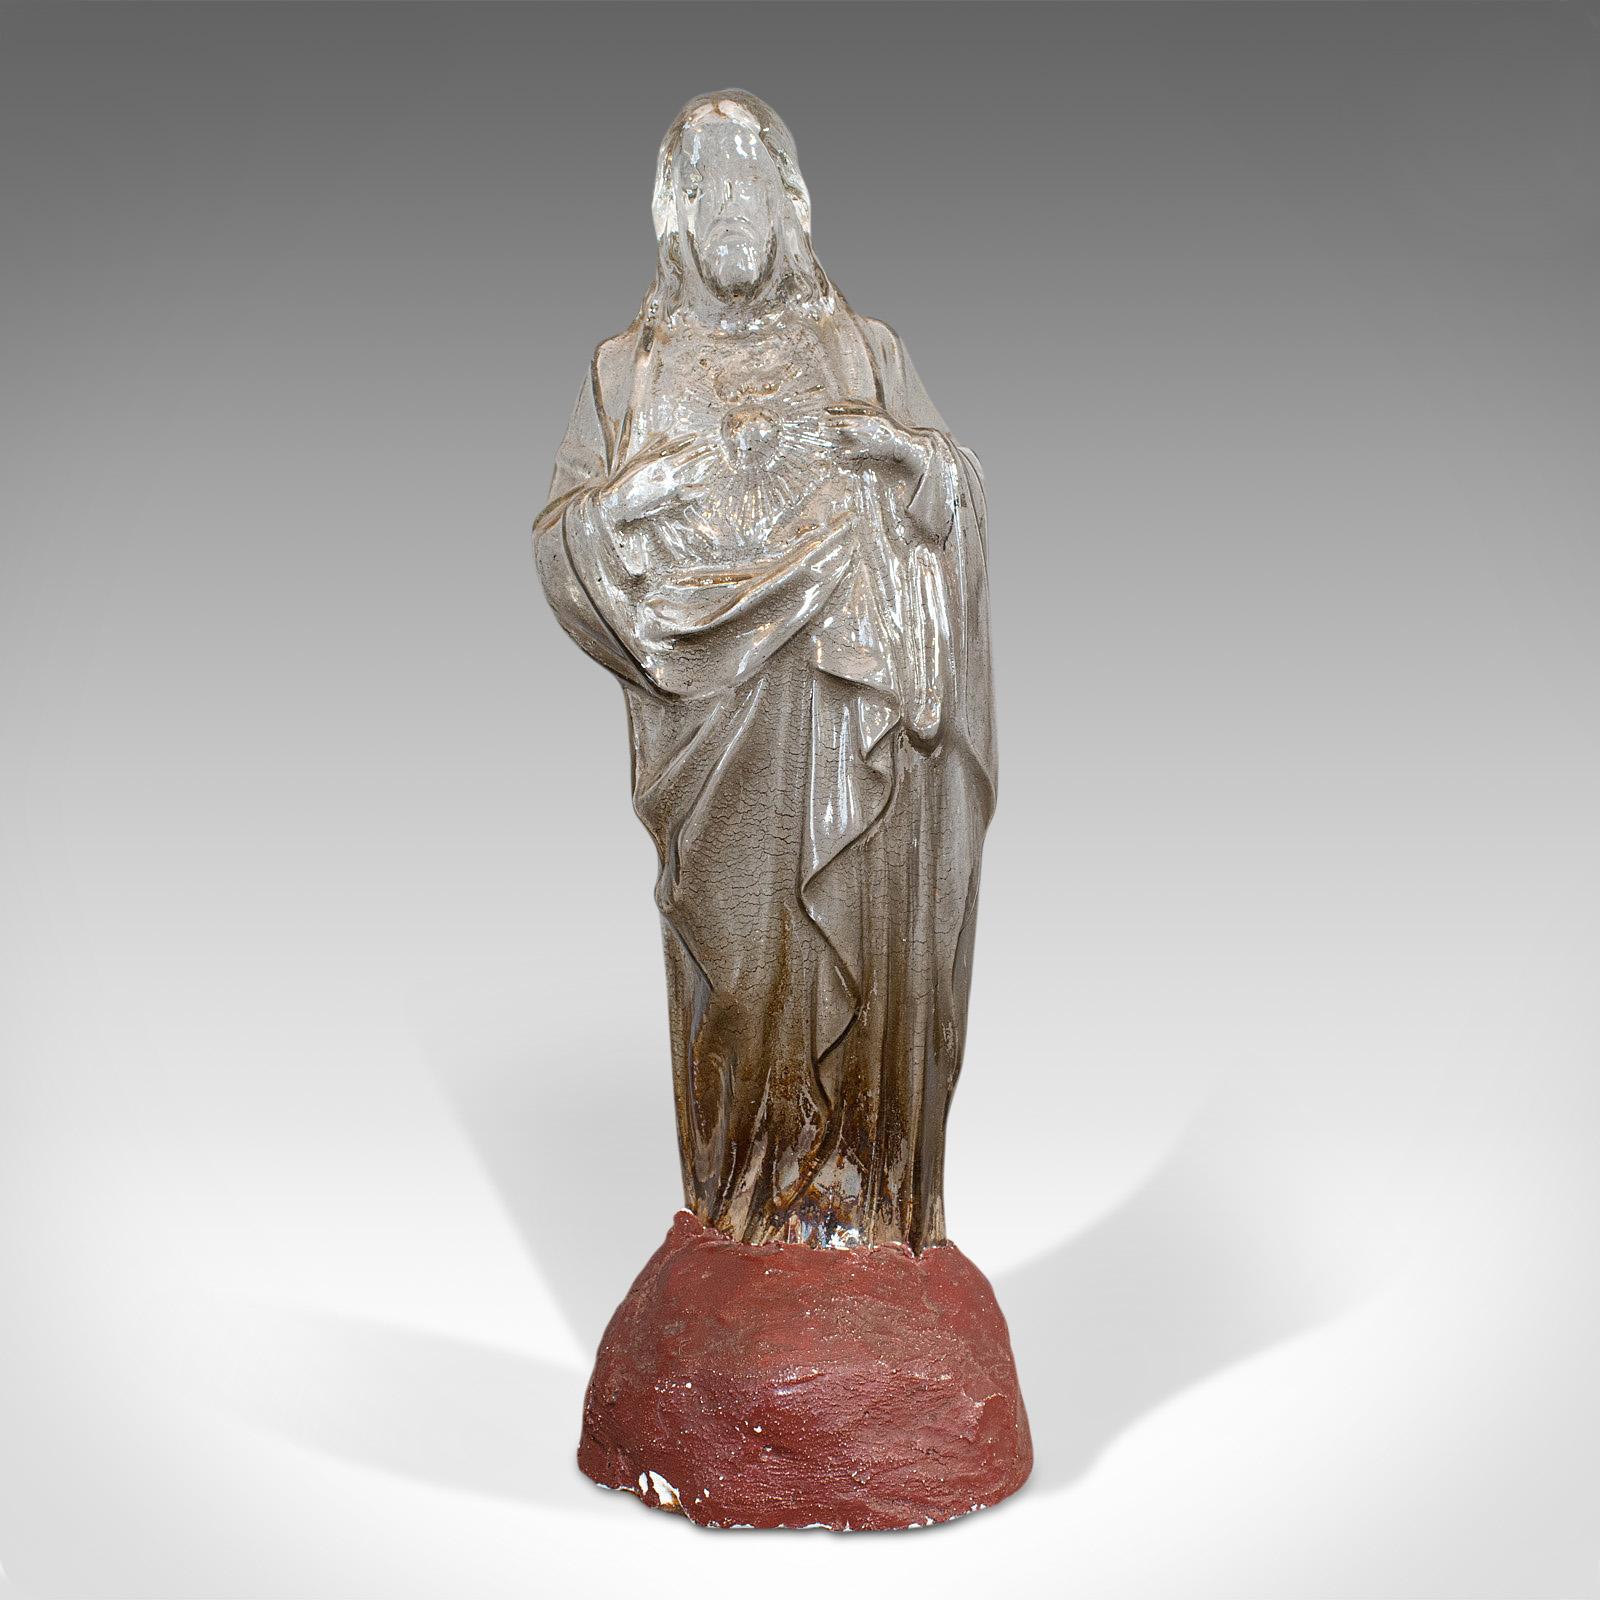 This is an antique bonbon jar. A French, glass confectionary statue depicting Jesus Christ and the sacred heart, dating to the late 19th century, circa 1900.

Fascinating, fin de siècle French glassware
Displays a desirable aged patina
Glass in